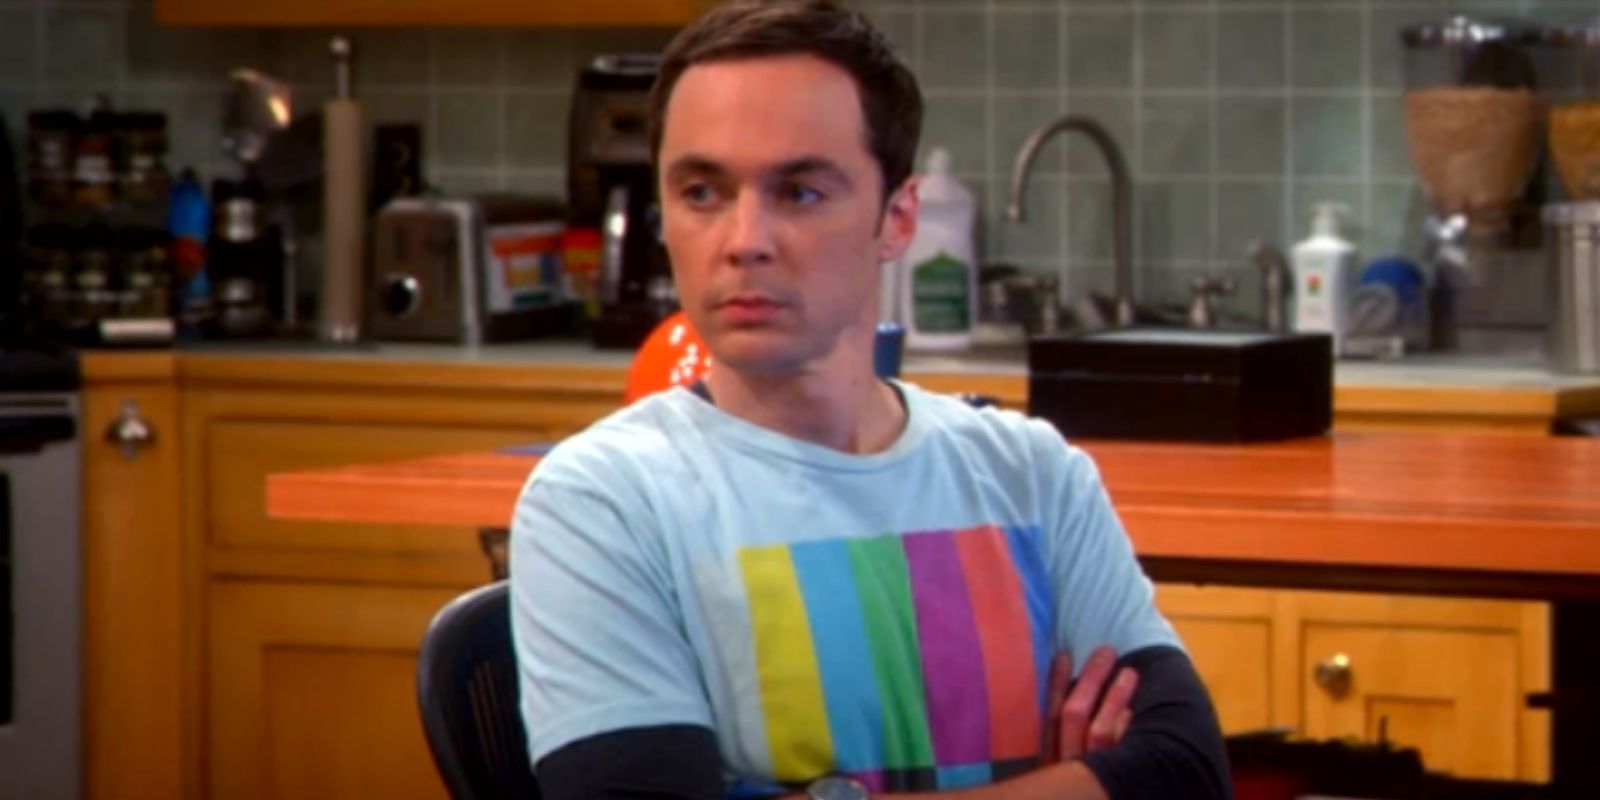 Sheldon Cooper wearing a pale blue shirt with multi color television test pattern bars in The Big Bang Theory